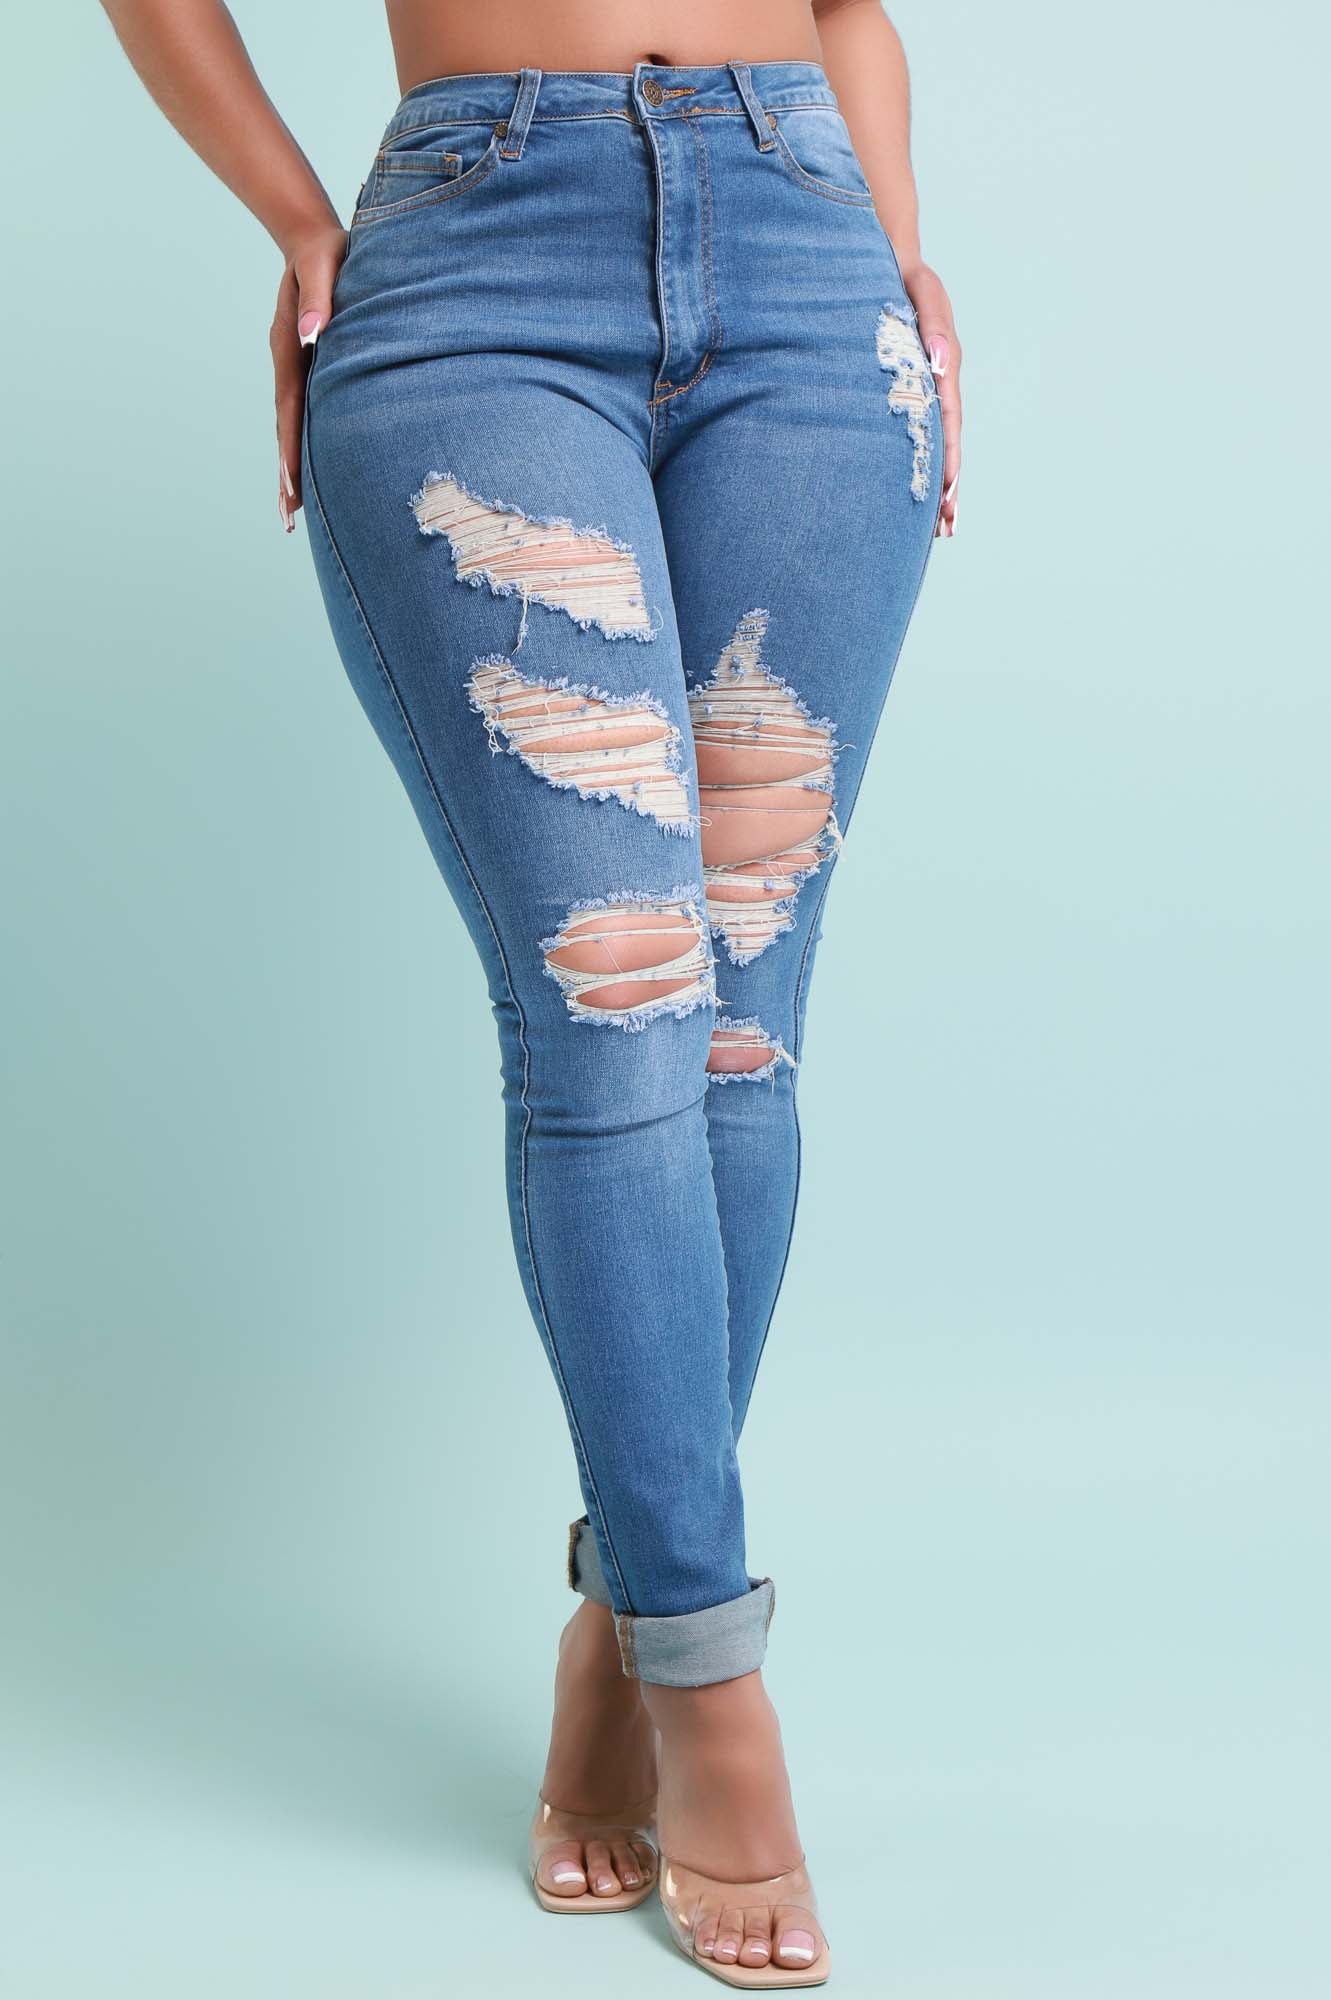 Don't Blame Me High Rise Distressed Hourglass Stretchy Jeans - Medium Wash - Swank A Posh